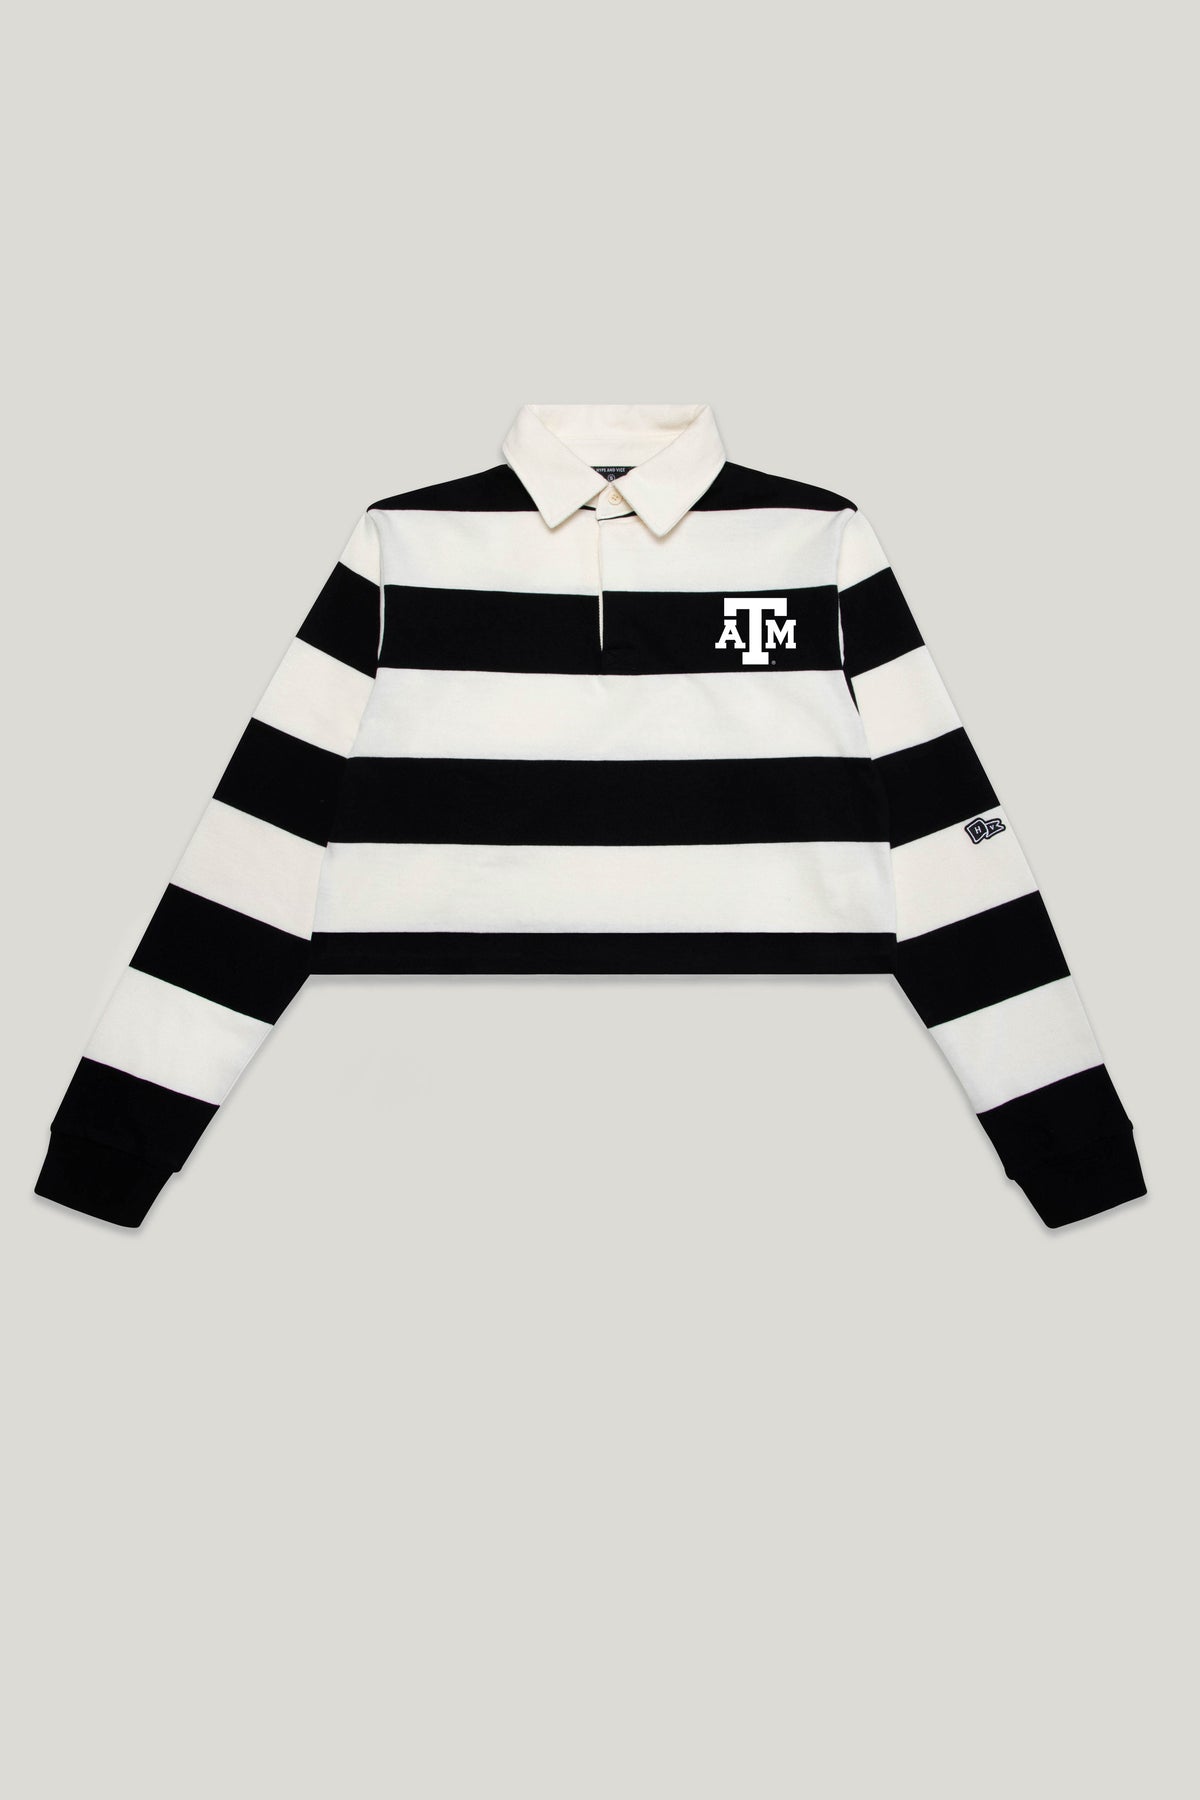 Texas A&M Rugby Top